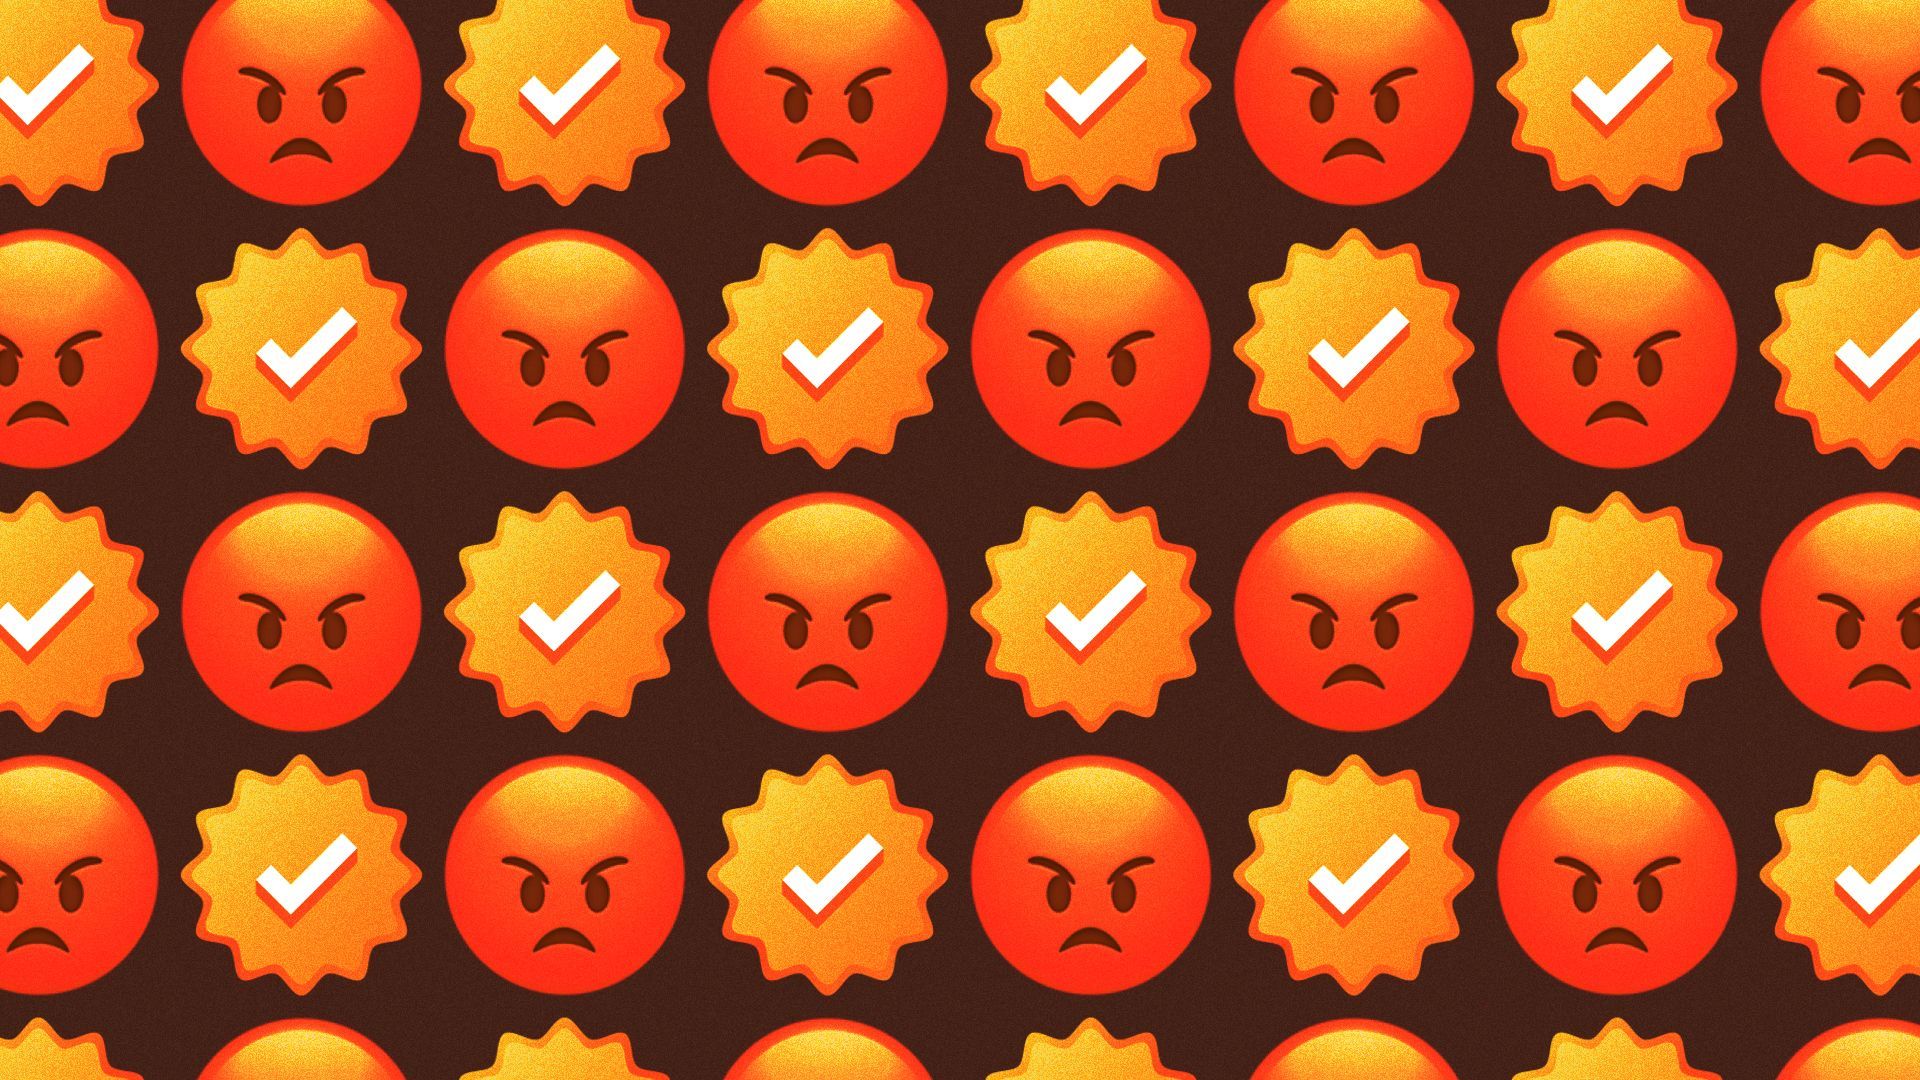 Illustration of a pattern of alternating angry emojis and gold verification check marks